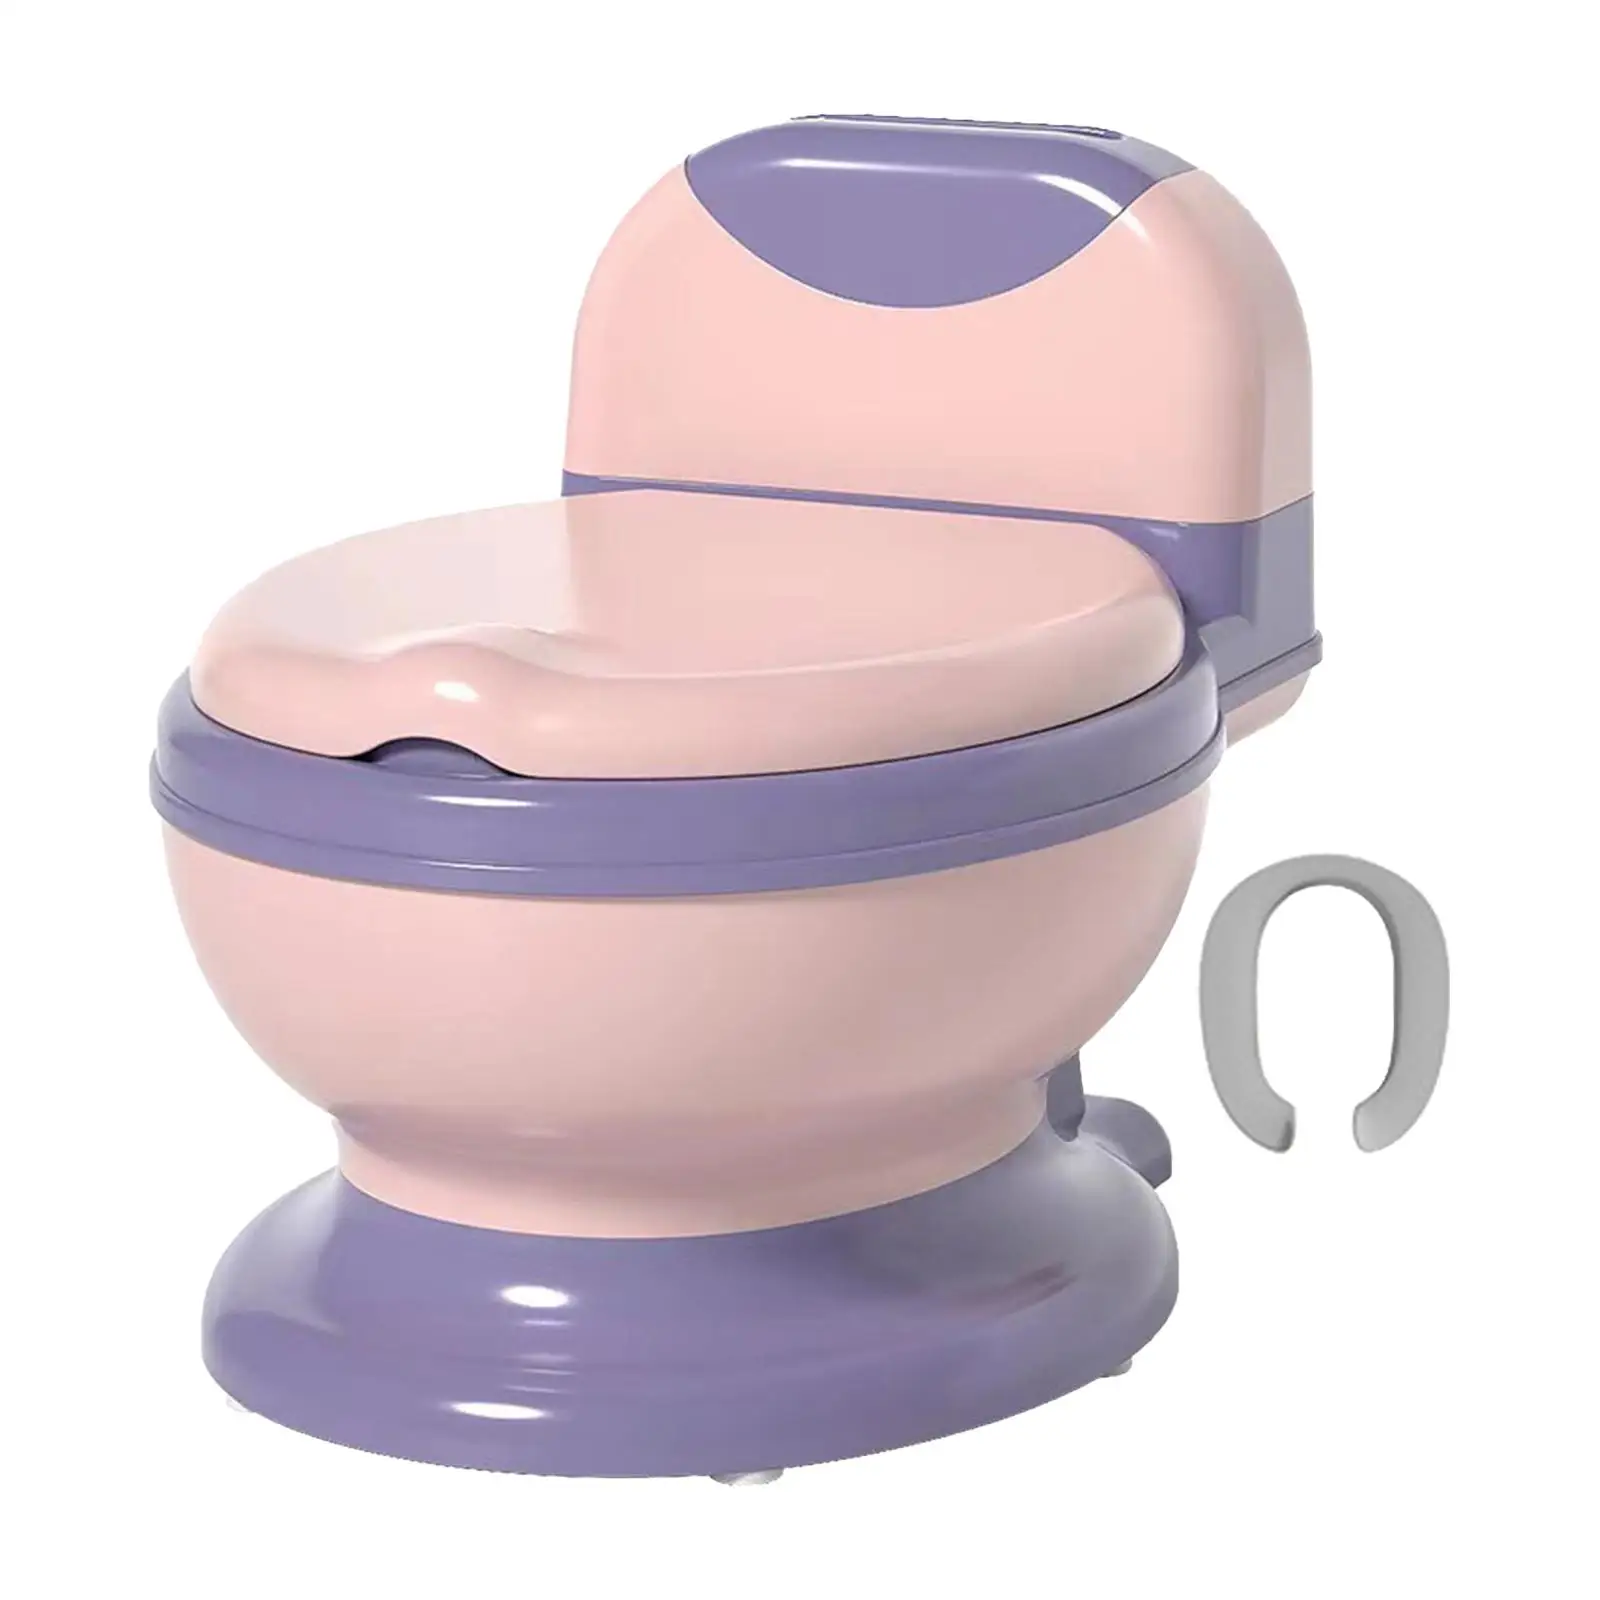 Potty Train Toilet Realistic Toilet Toddlers Potty Chair Real Feel Potty for Toddlers